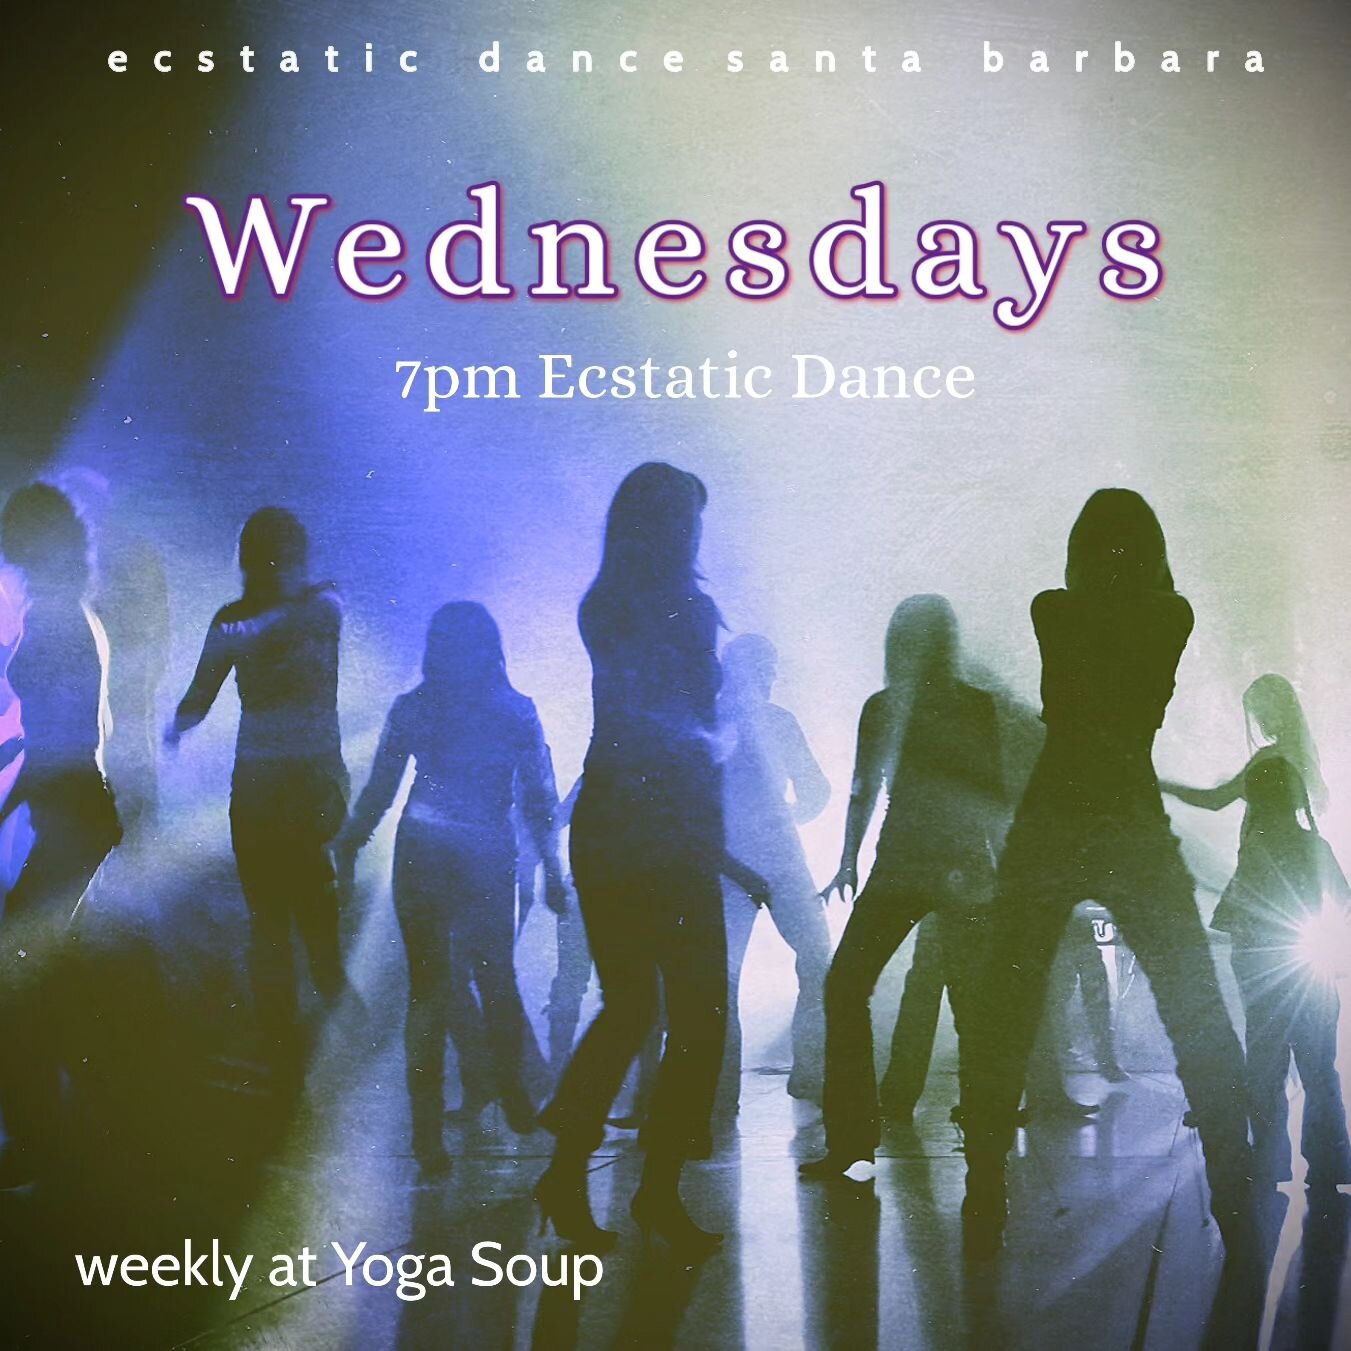 We take our wild Wednesday ecstatic dance INDOORS to Yoga Soup at 7pm starting 1/24/24 as our beloved grass is allowed to winter and restore itself over the next few months.

We will keep you posted about our return to the beach but for now you can e